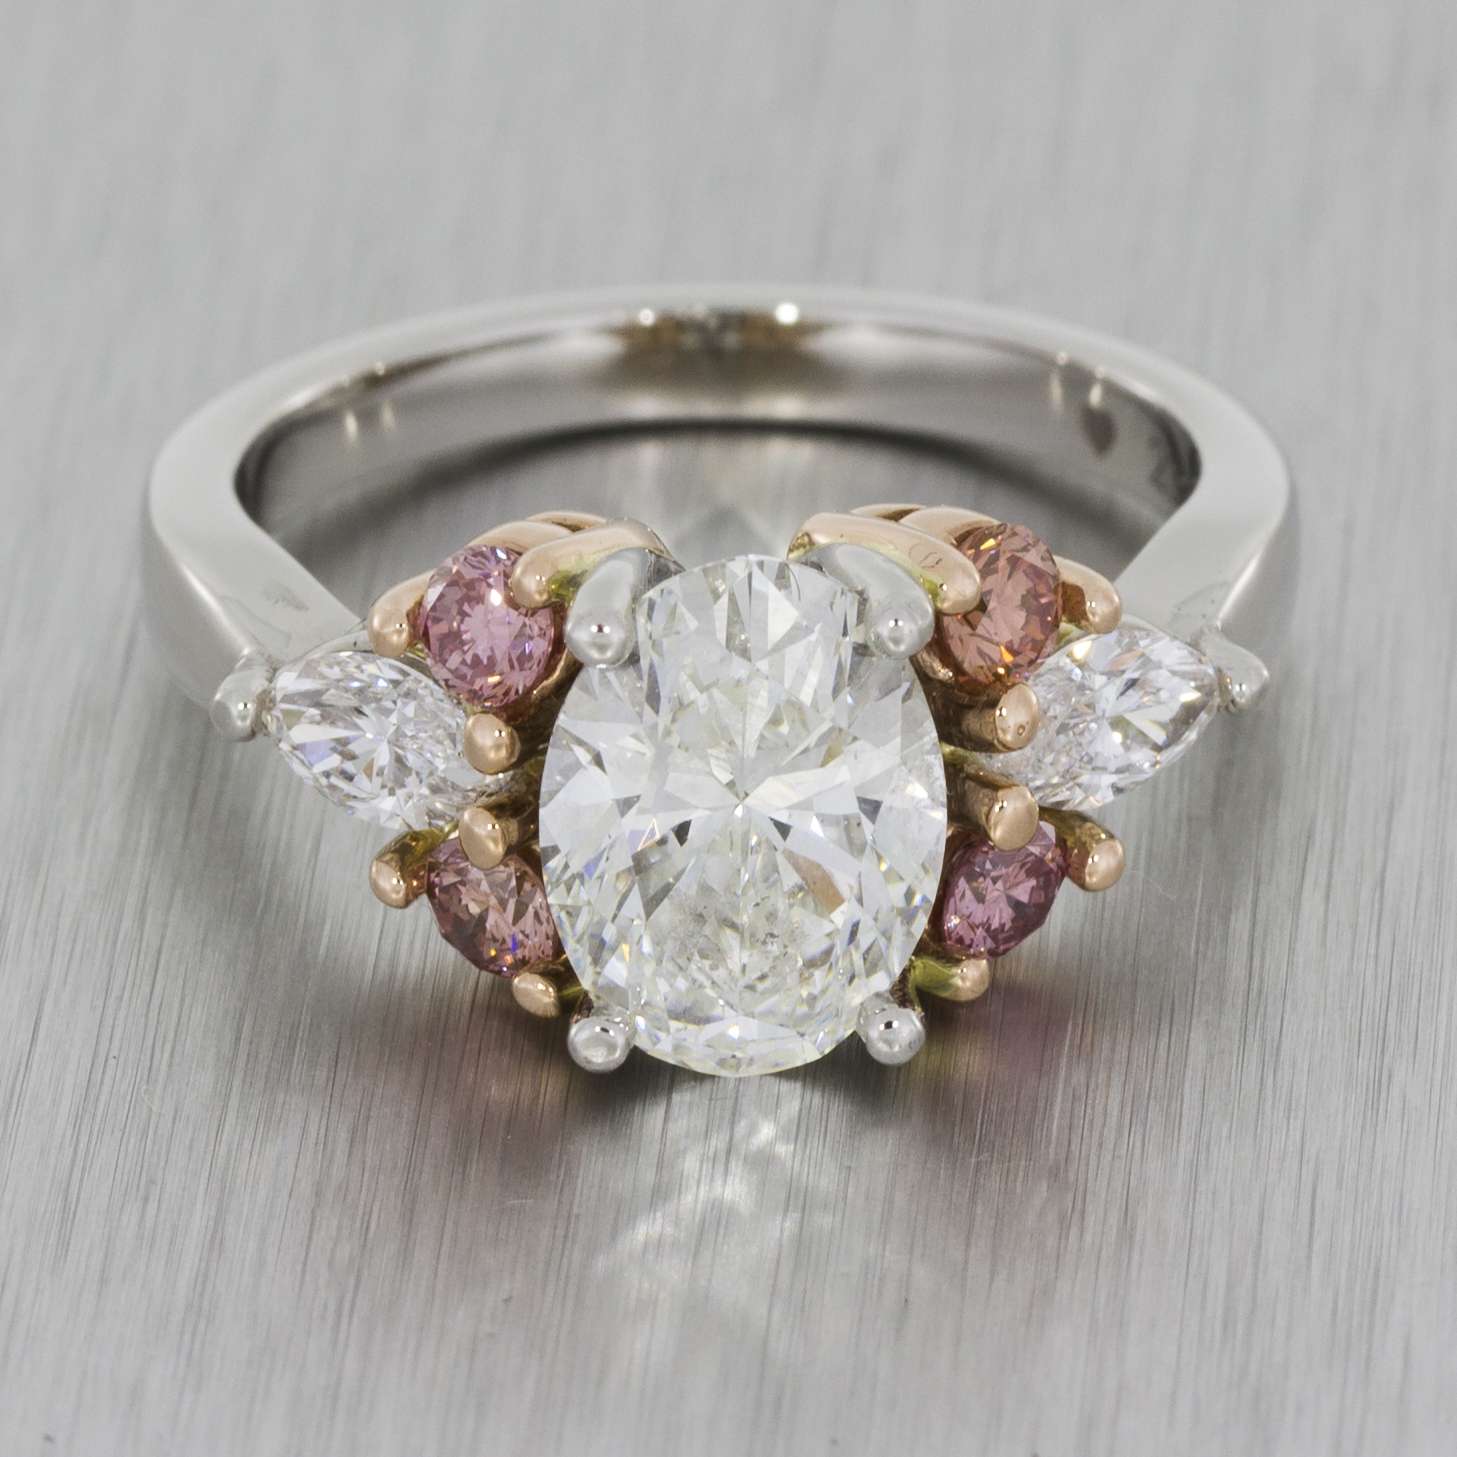 Create Your Own Completely Bespoke, One-of-a-Kind Engagement & Wedding Rings with Durham Rose (2)